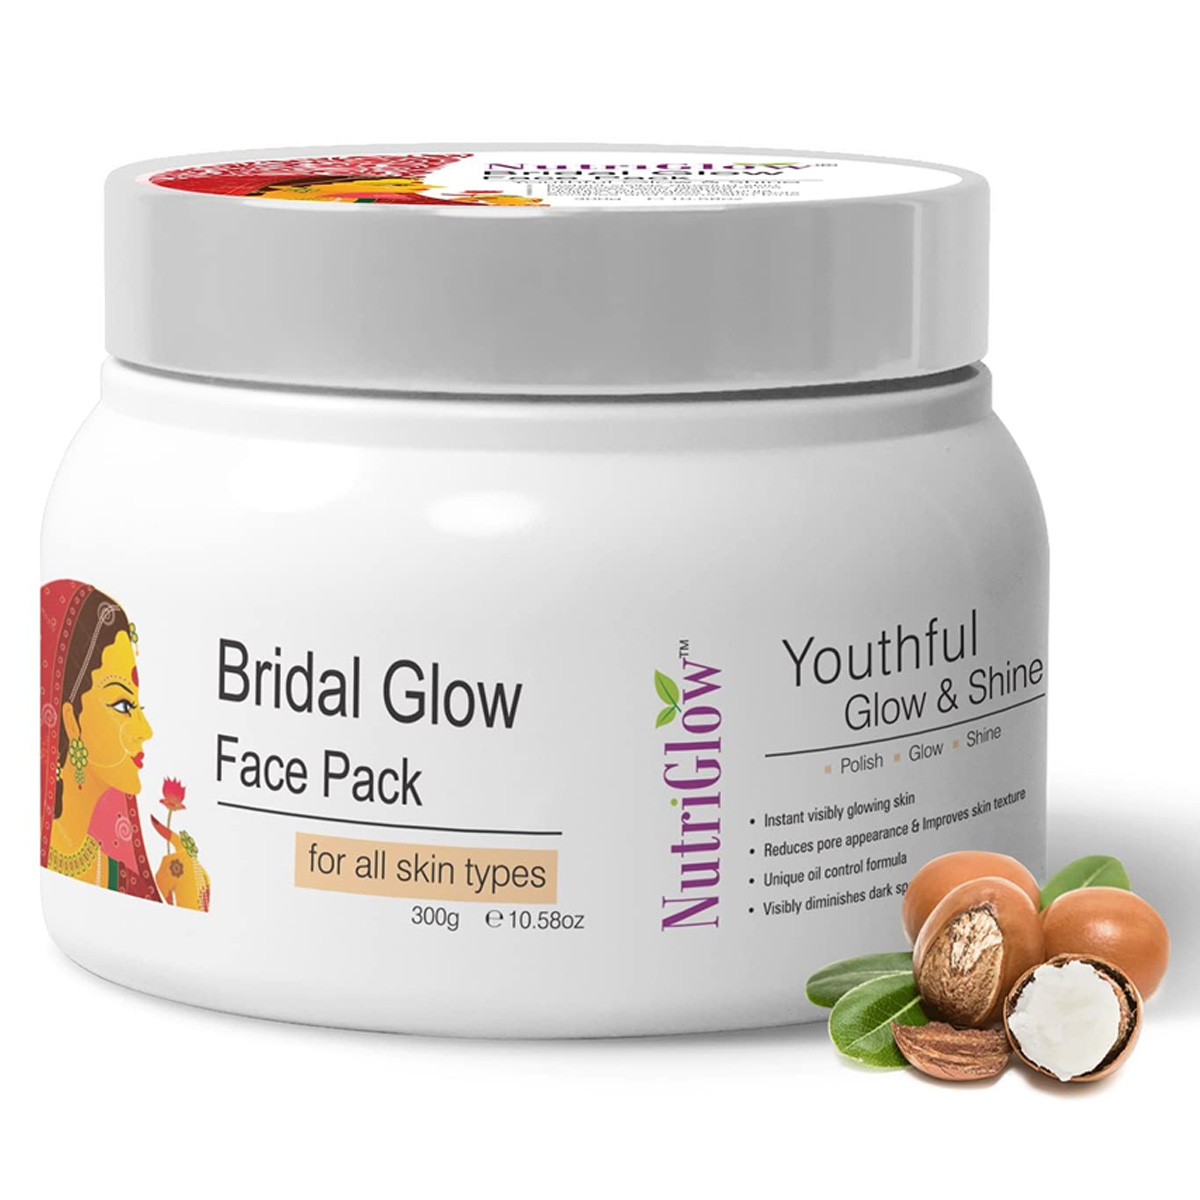 NutriGlow Bridal Glow Face Pack For Instant Brightening And Hydrating Skin, 300gm